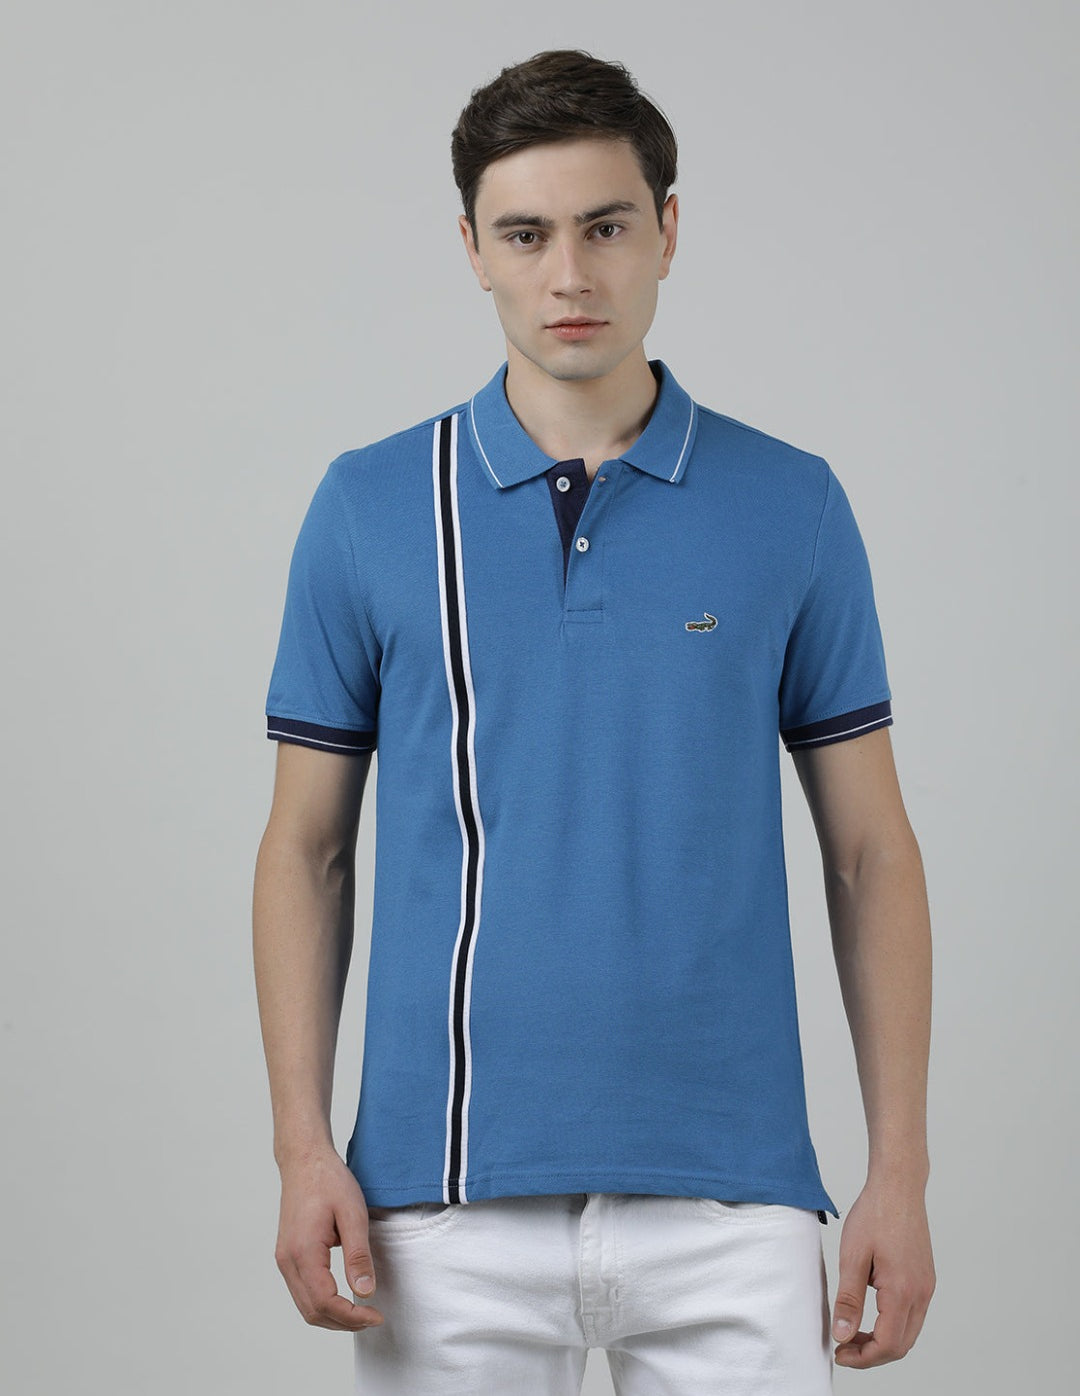 Casual Blue Solid Polo T-Shirt Half Sleeve Slim Fit with Collar for Men